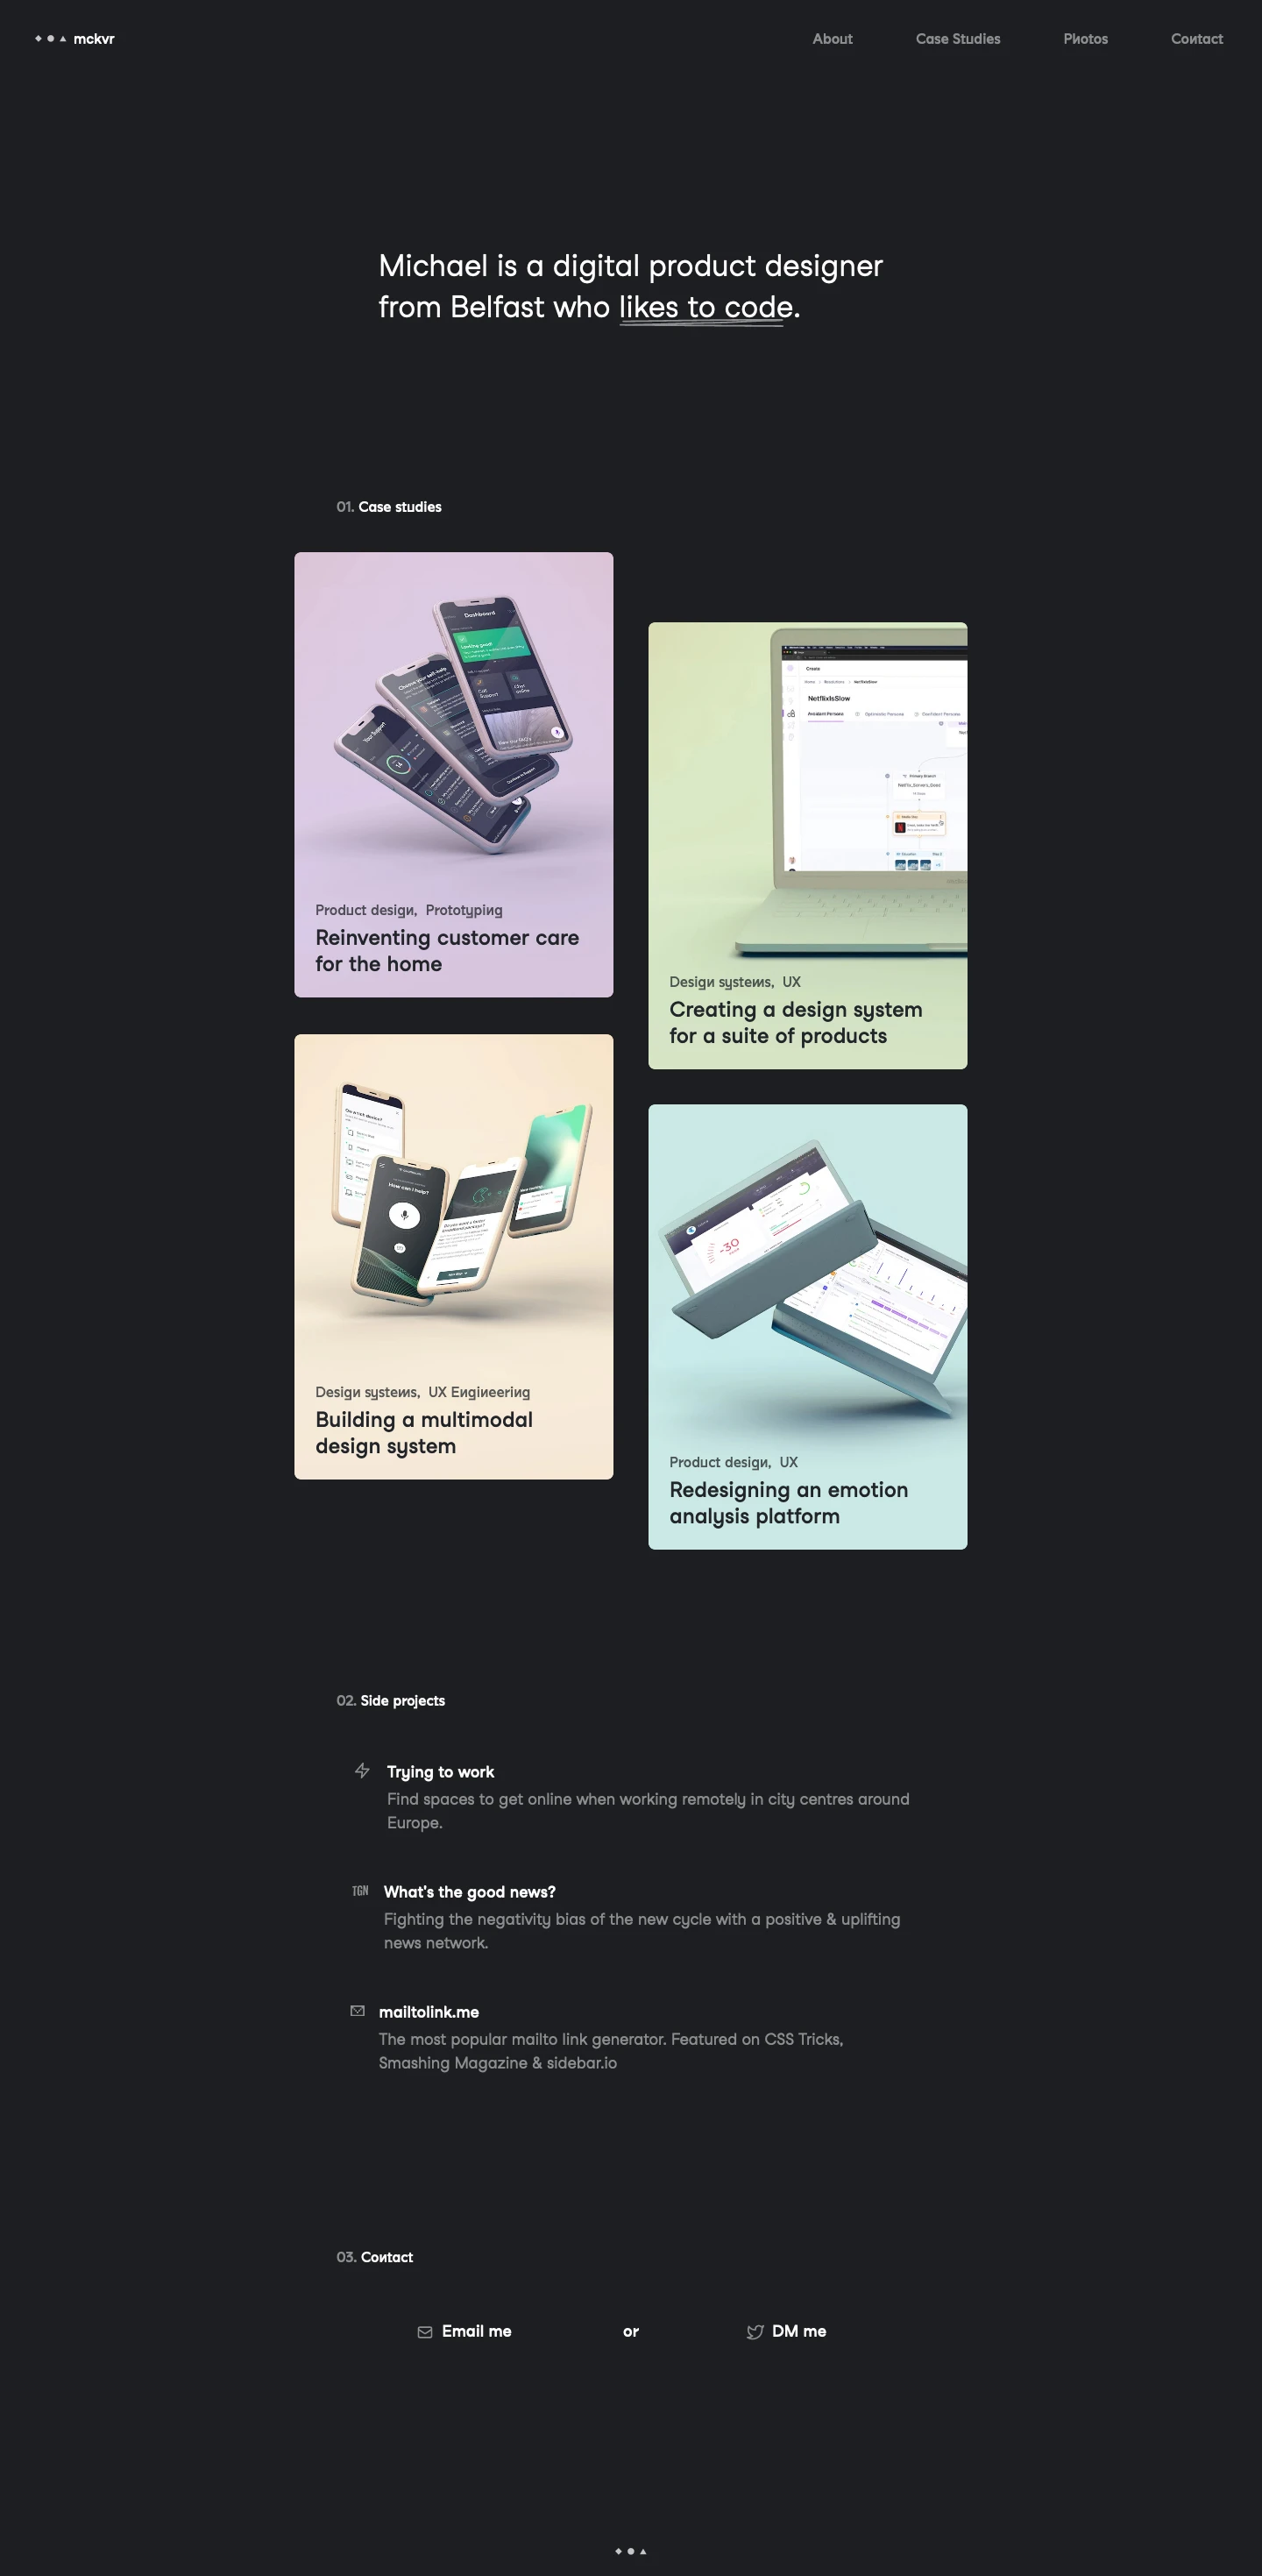 Michael McKeever Landing Page Example: Michael McKeever is a digital product designer from Belfast who likes solving problems with design and code.